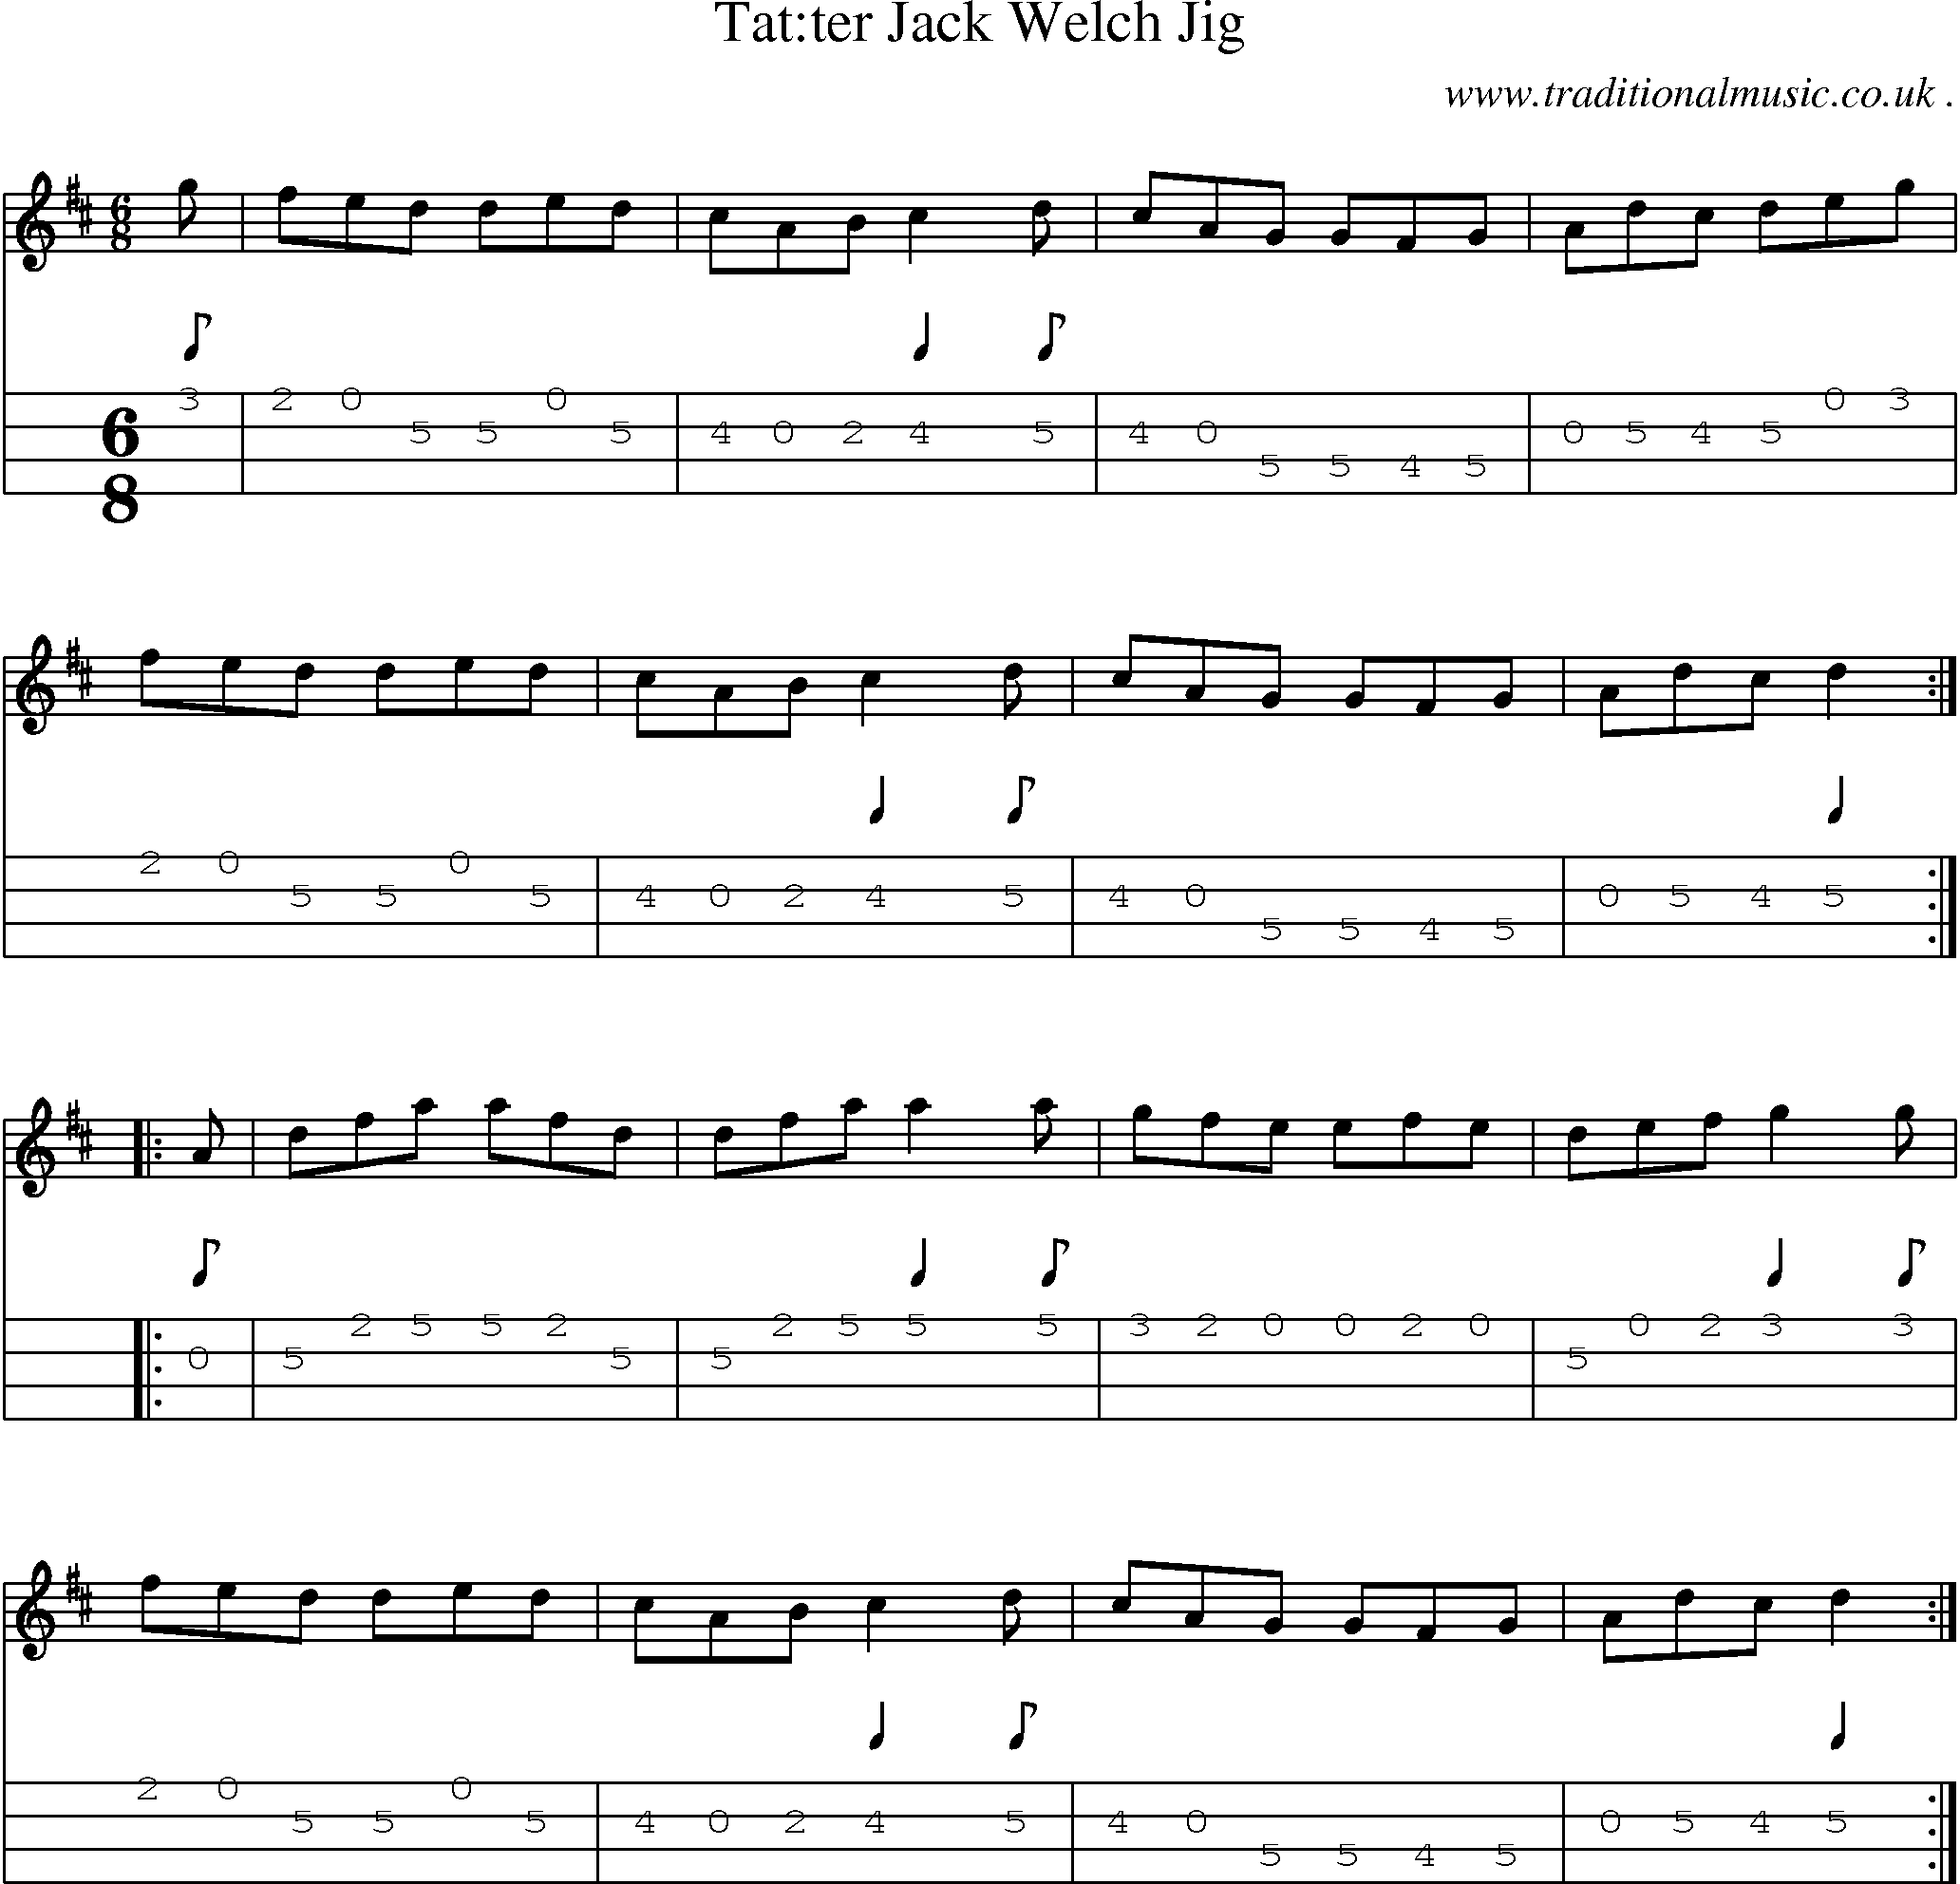 Sheet-Music and Mandolin Tabs for Tatter Jack Welch Jig